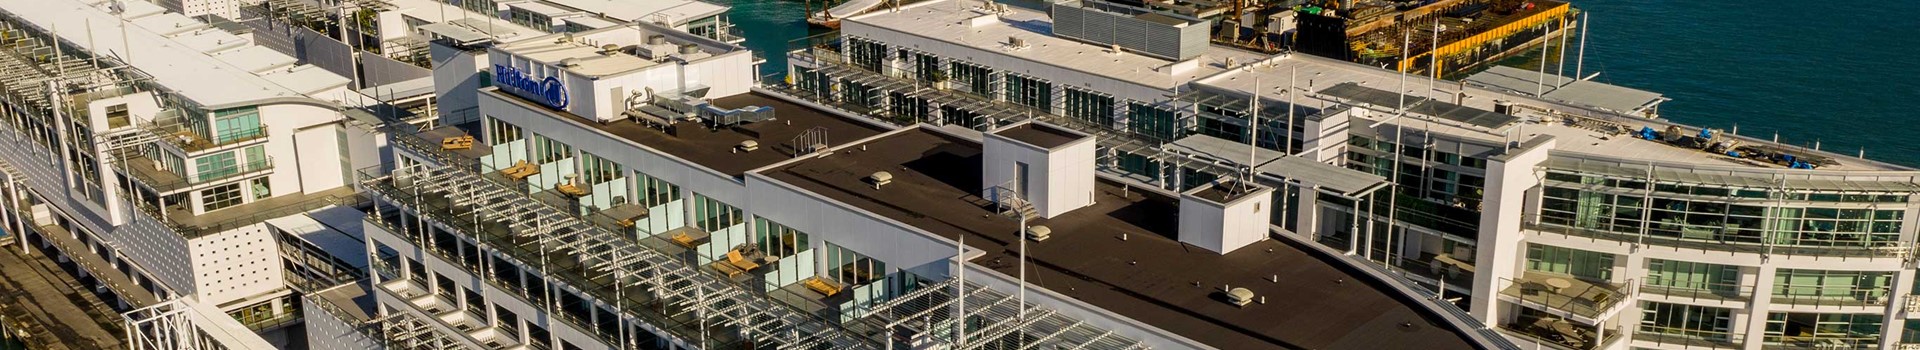 An Energy-Efficient, Cost-Effective Warm Roof System for Hilton Hotel